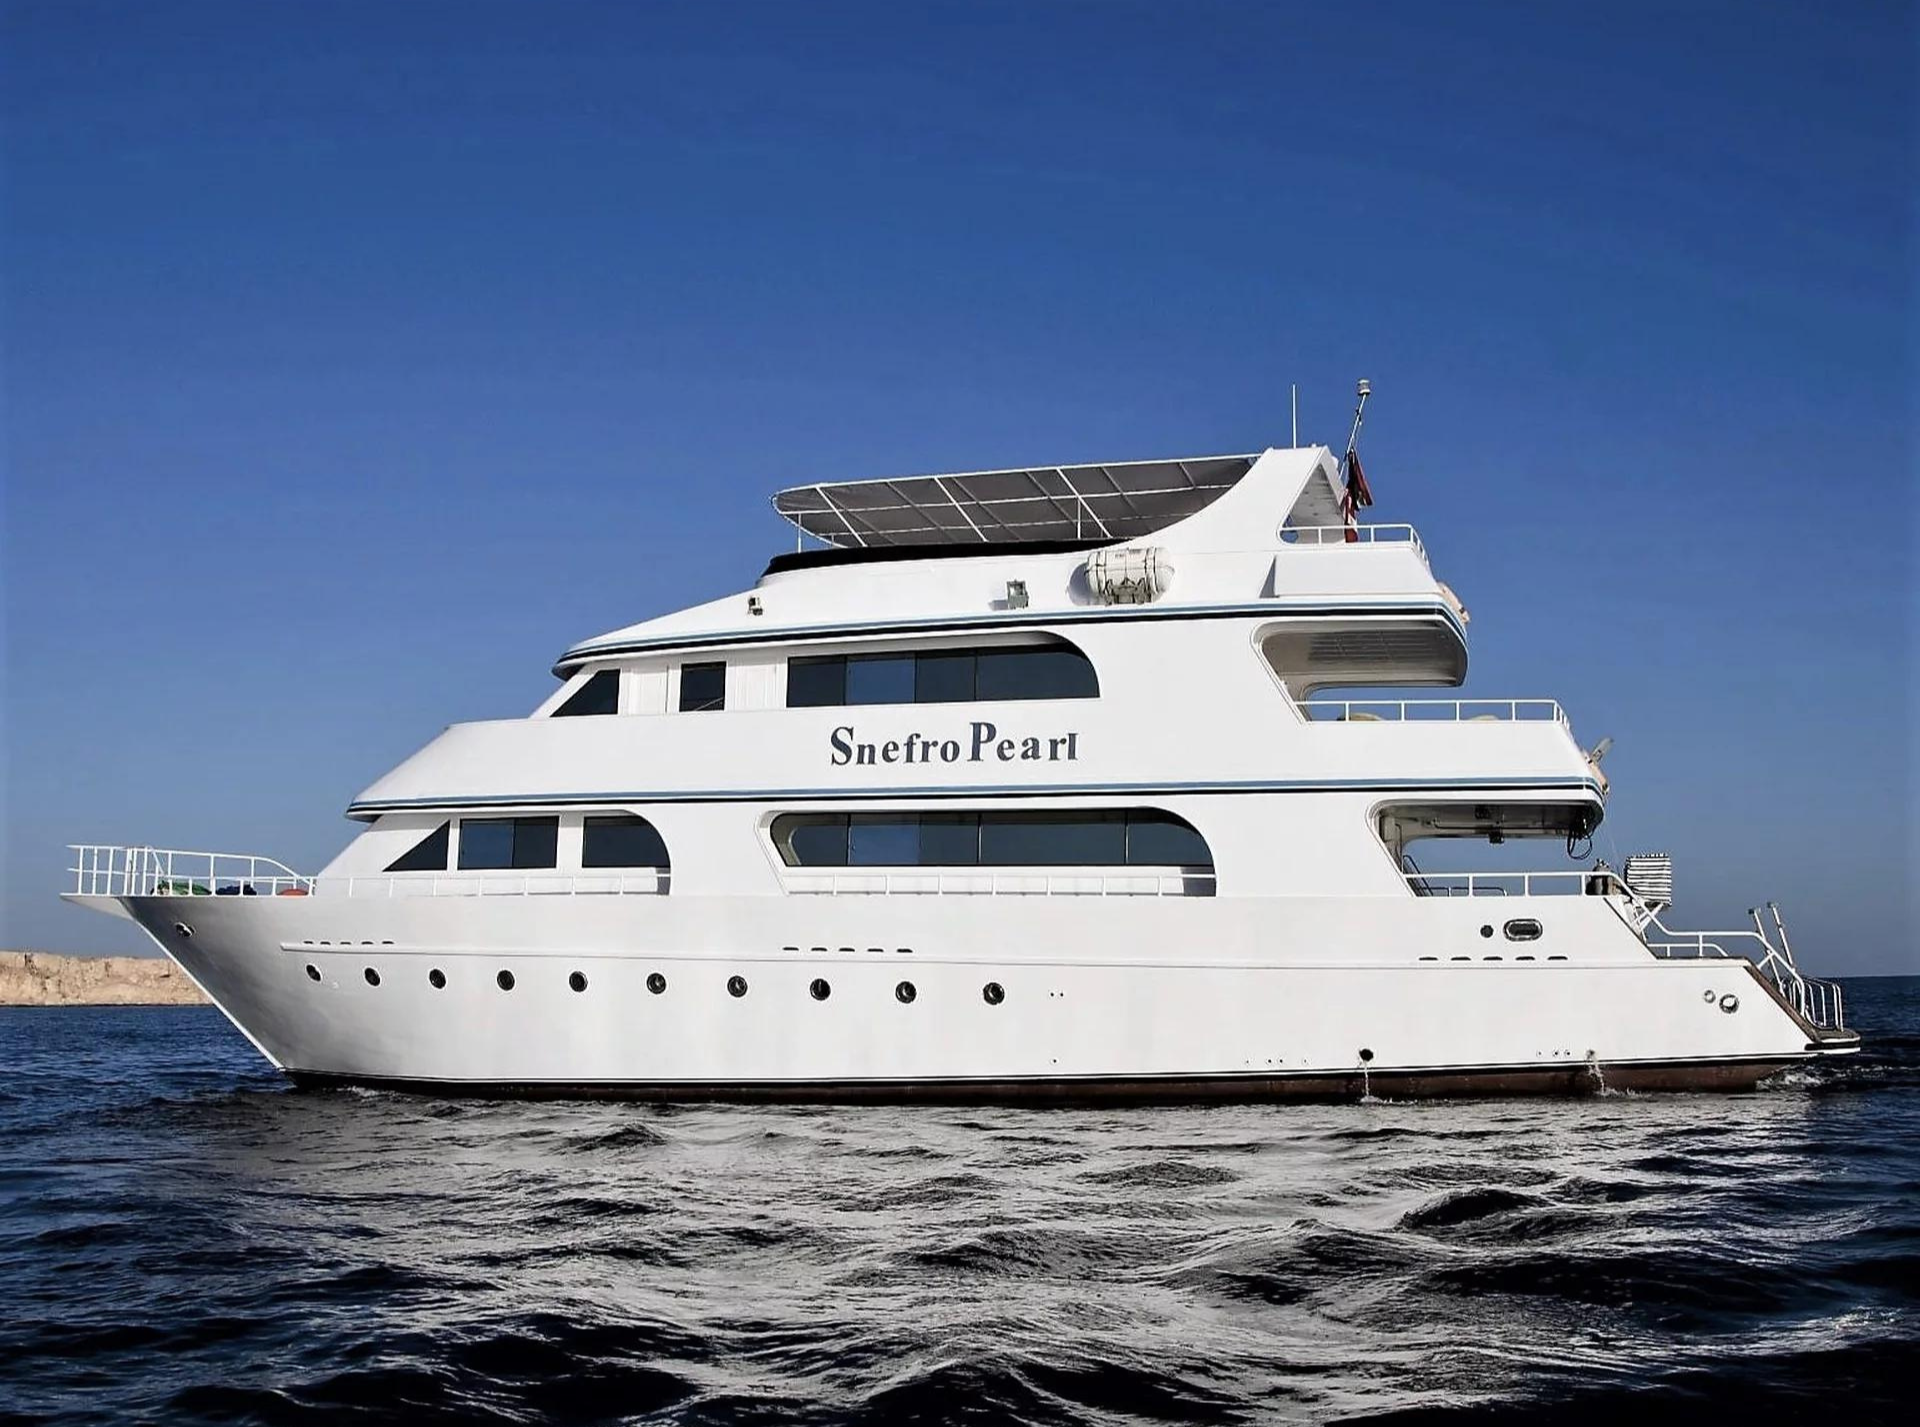 Image of the Snefro Pearl Liveaboard, the best eco travel option.